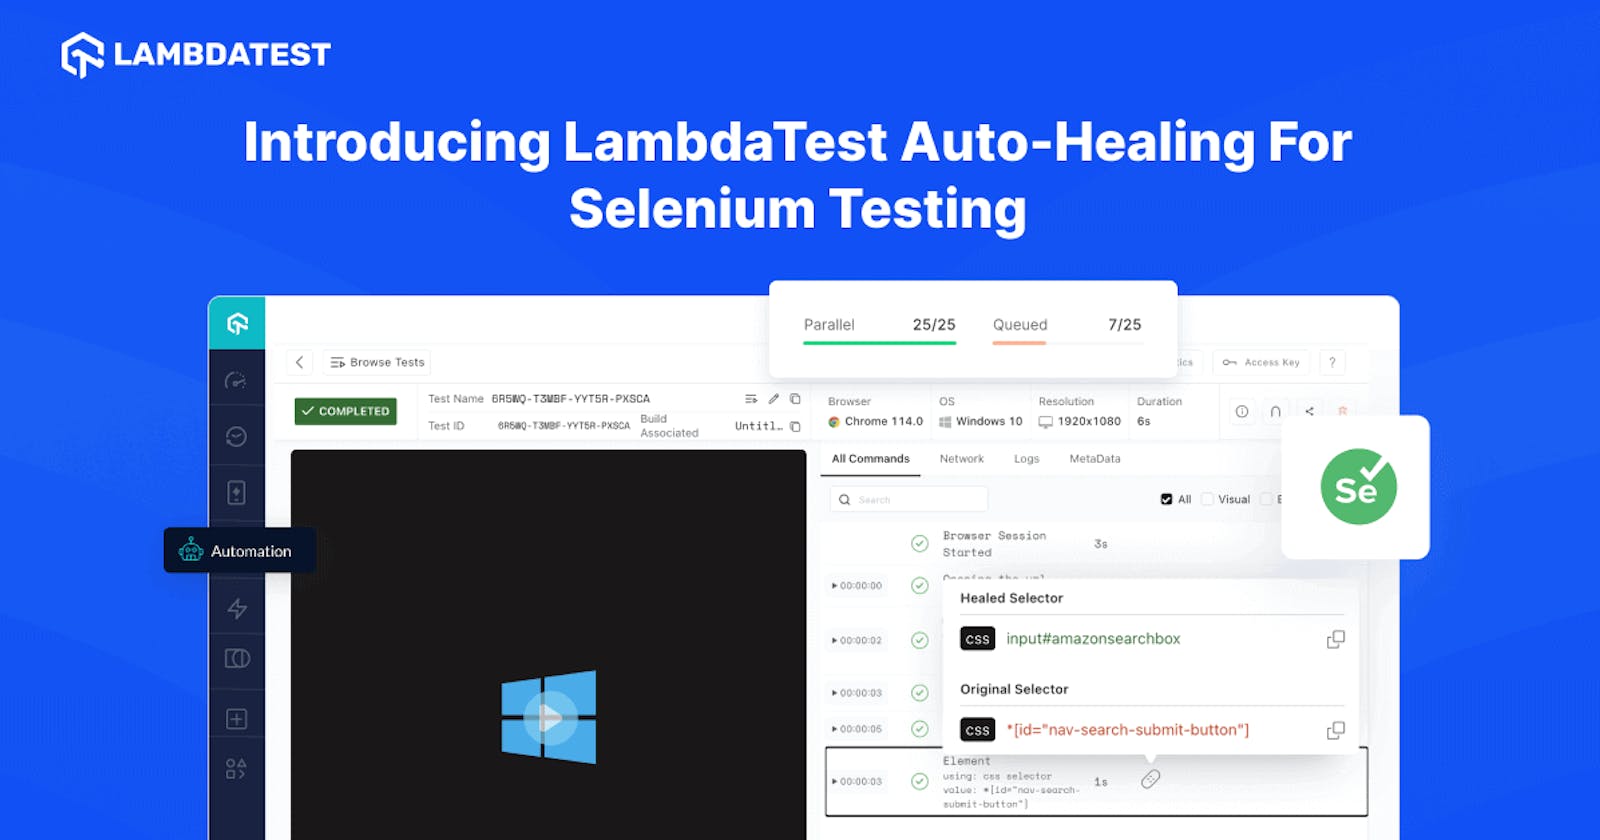 Overcome Flaky Tests And Unexpected Failures With LambdaTest Auto-Healing!